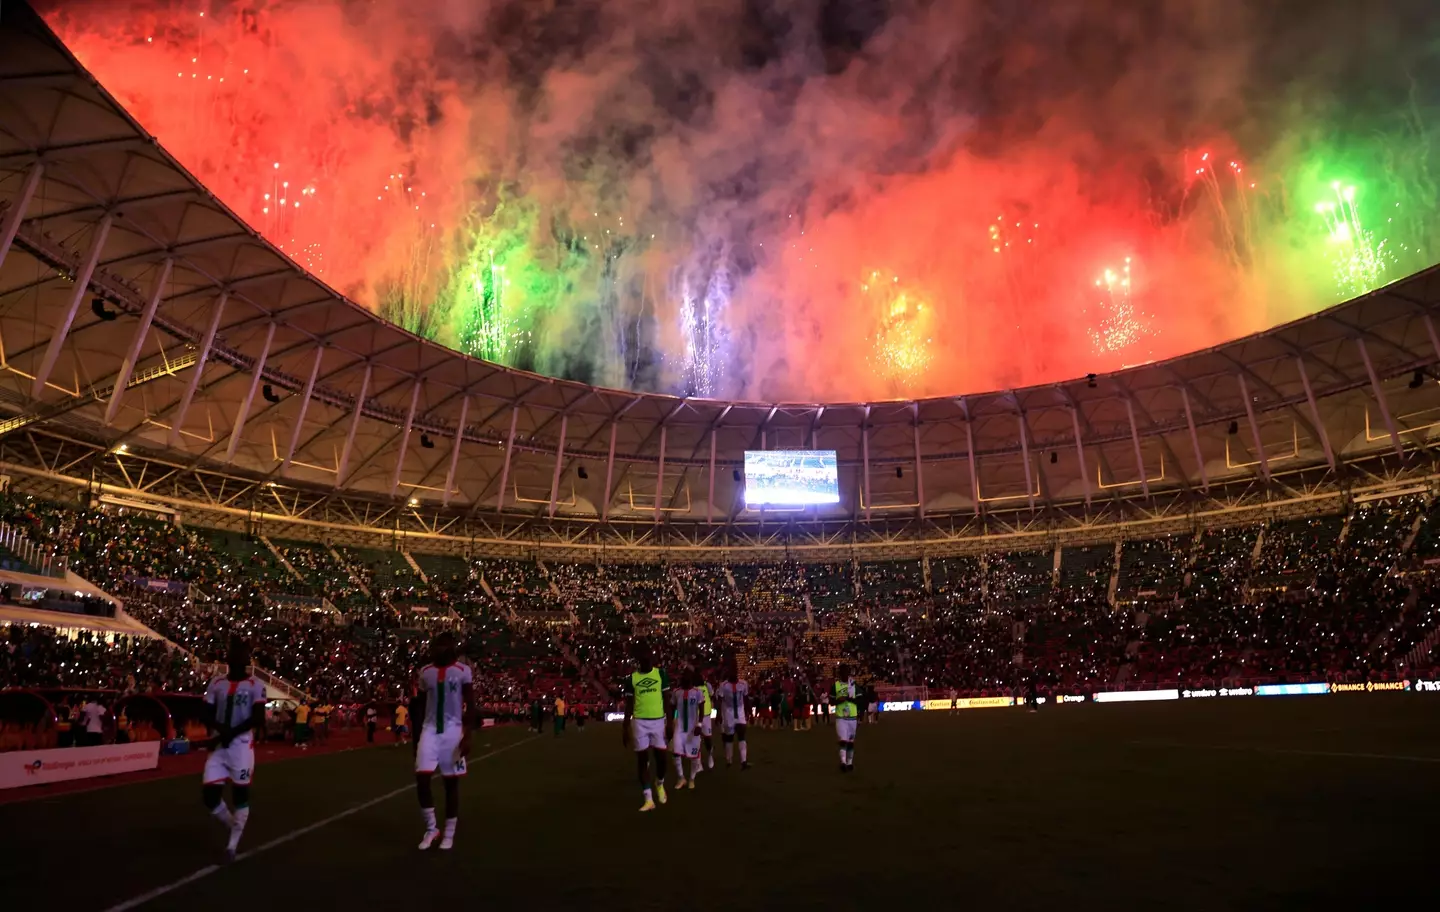 Fireworks go off after Cameroon opened the tournament with a win. Image: PA Images